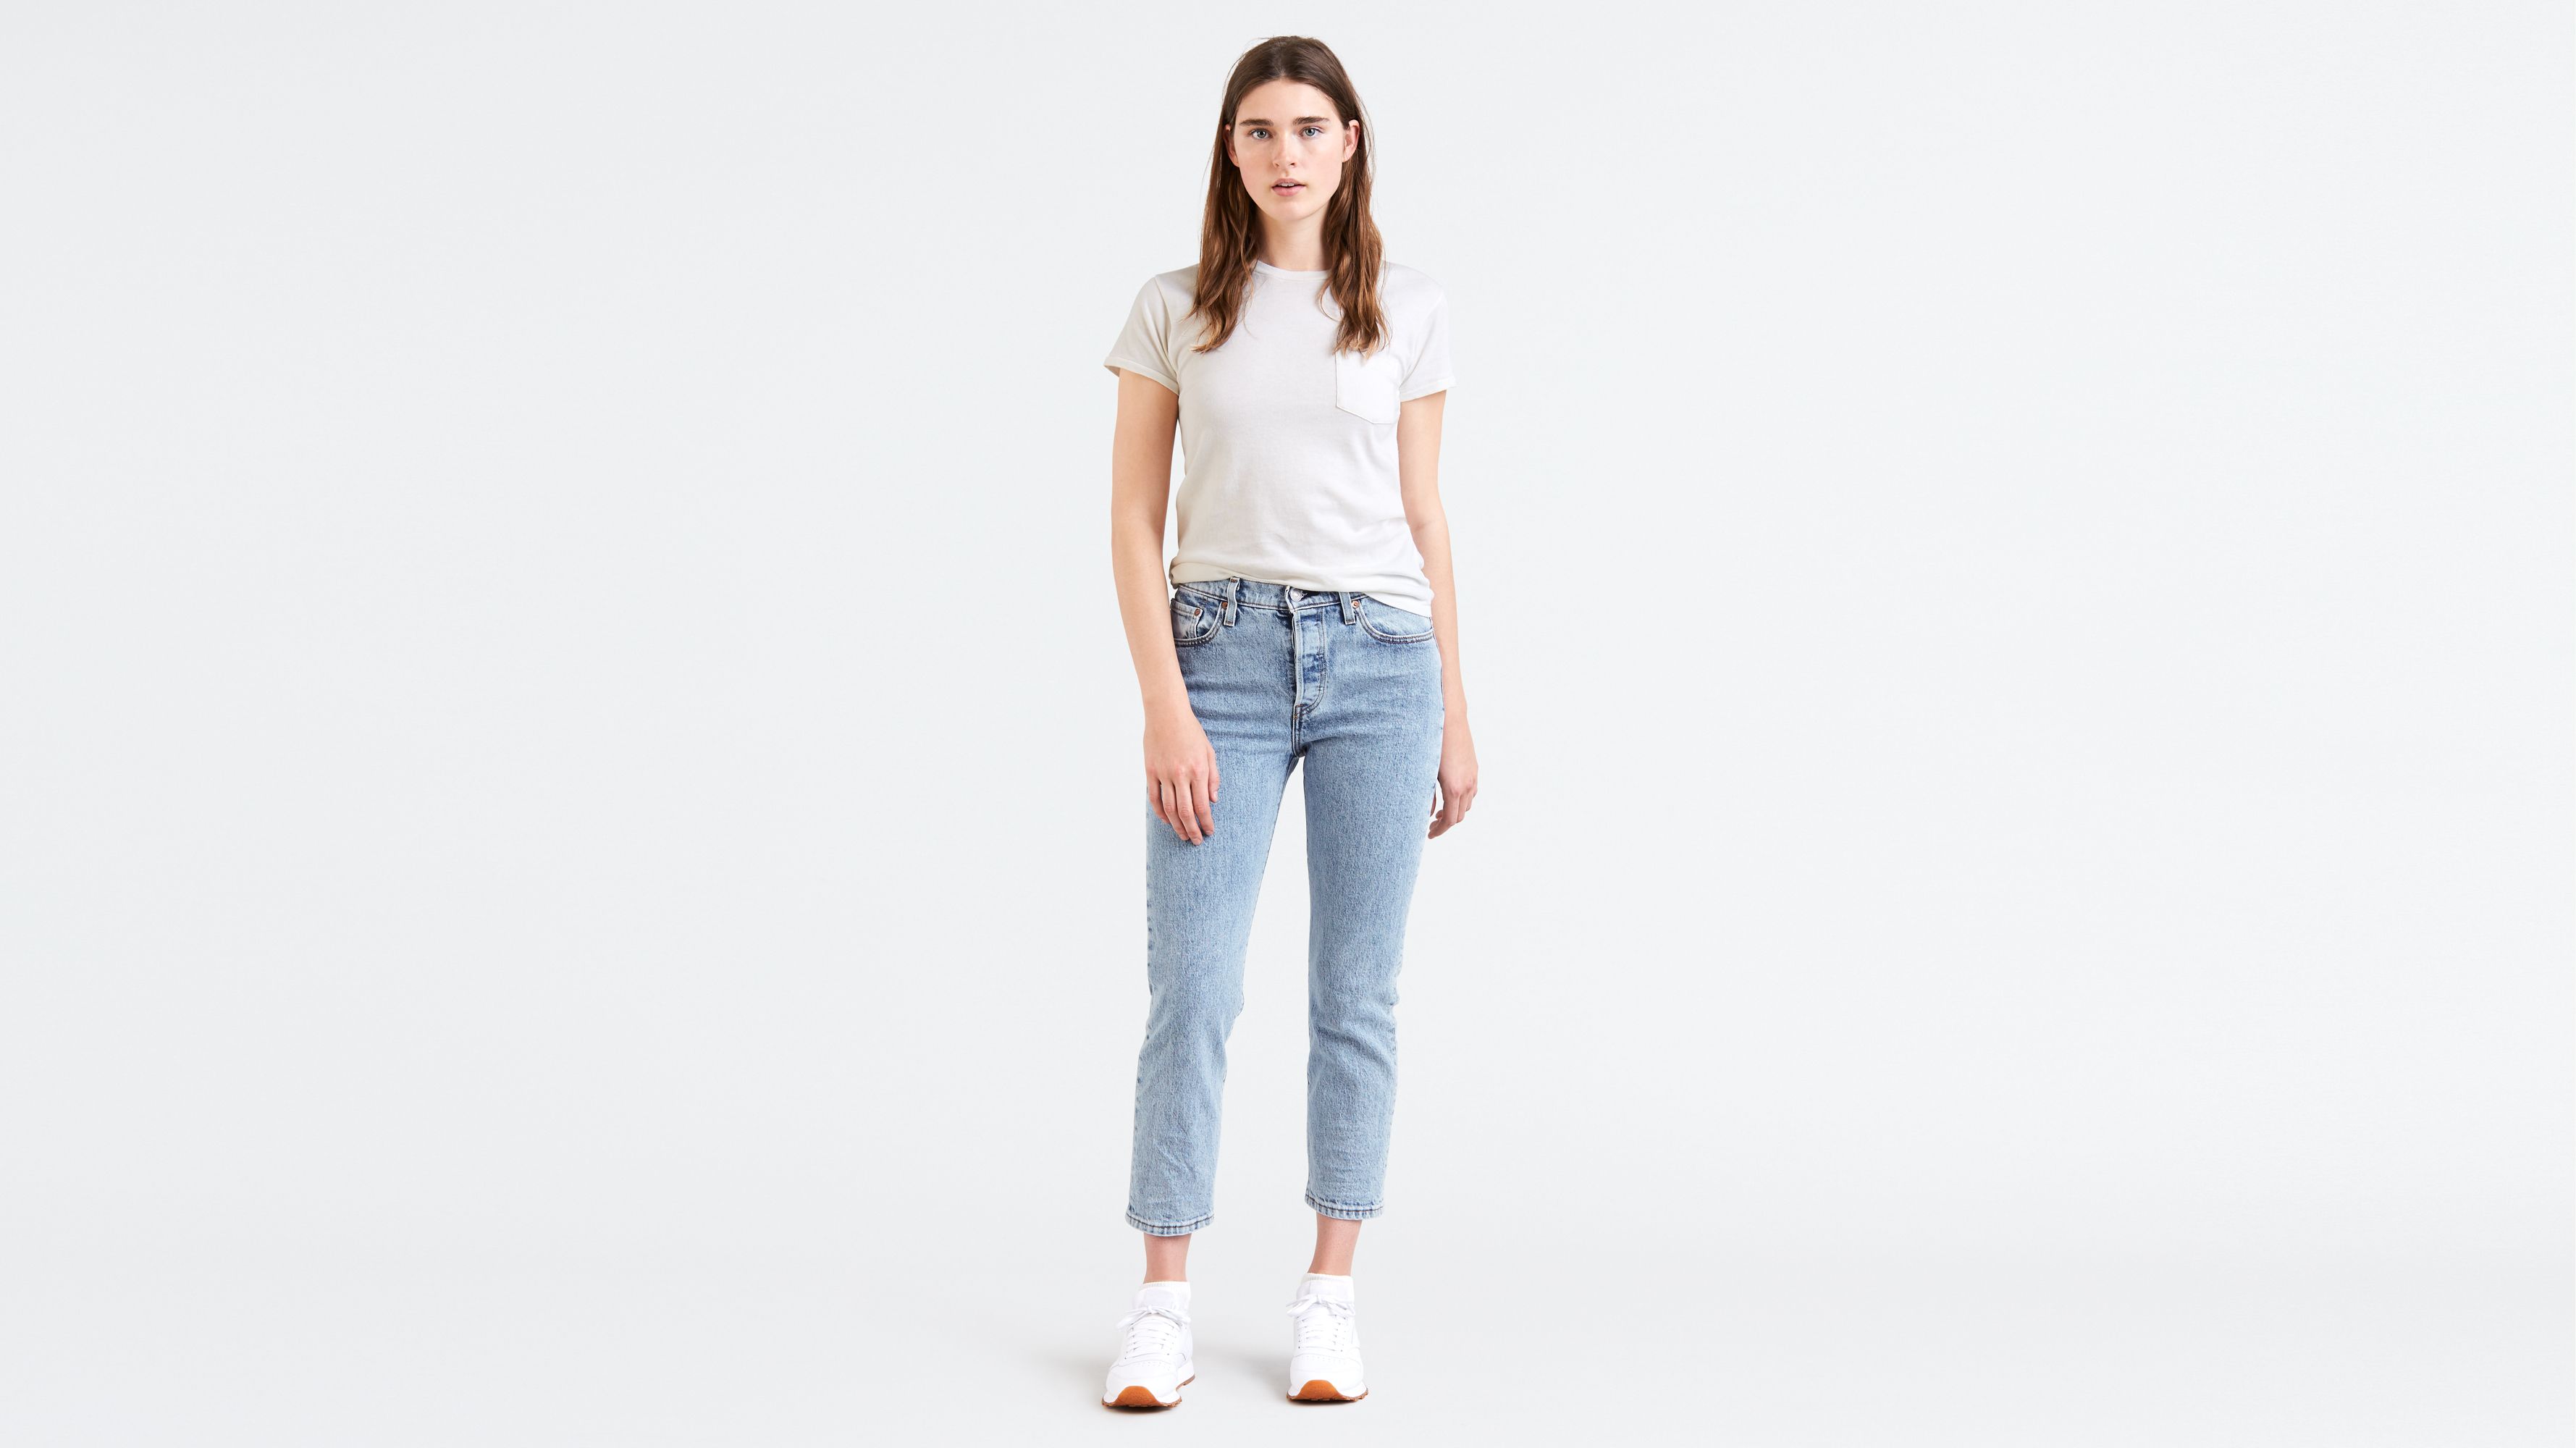 levis 501 cropped